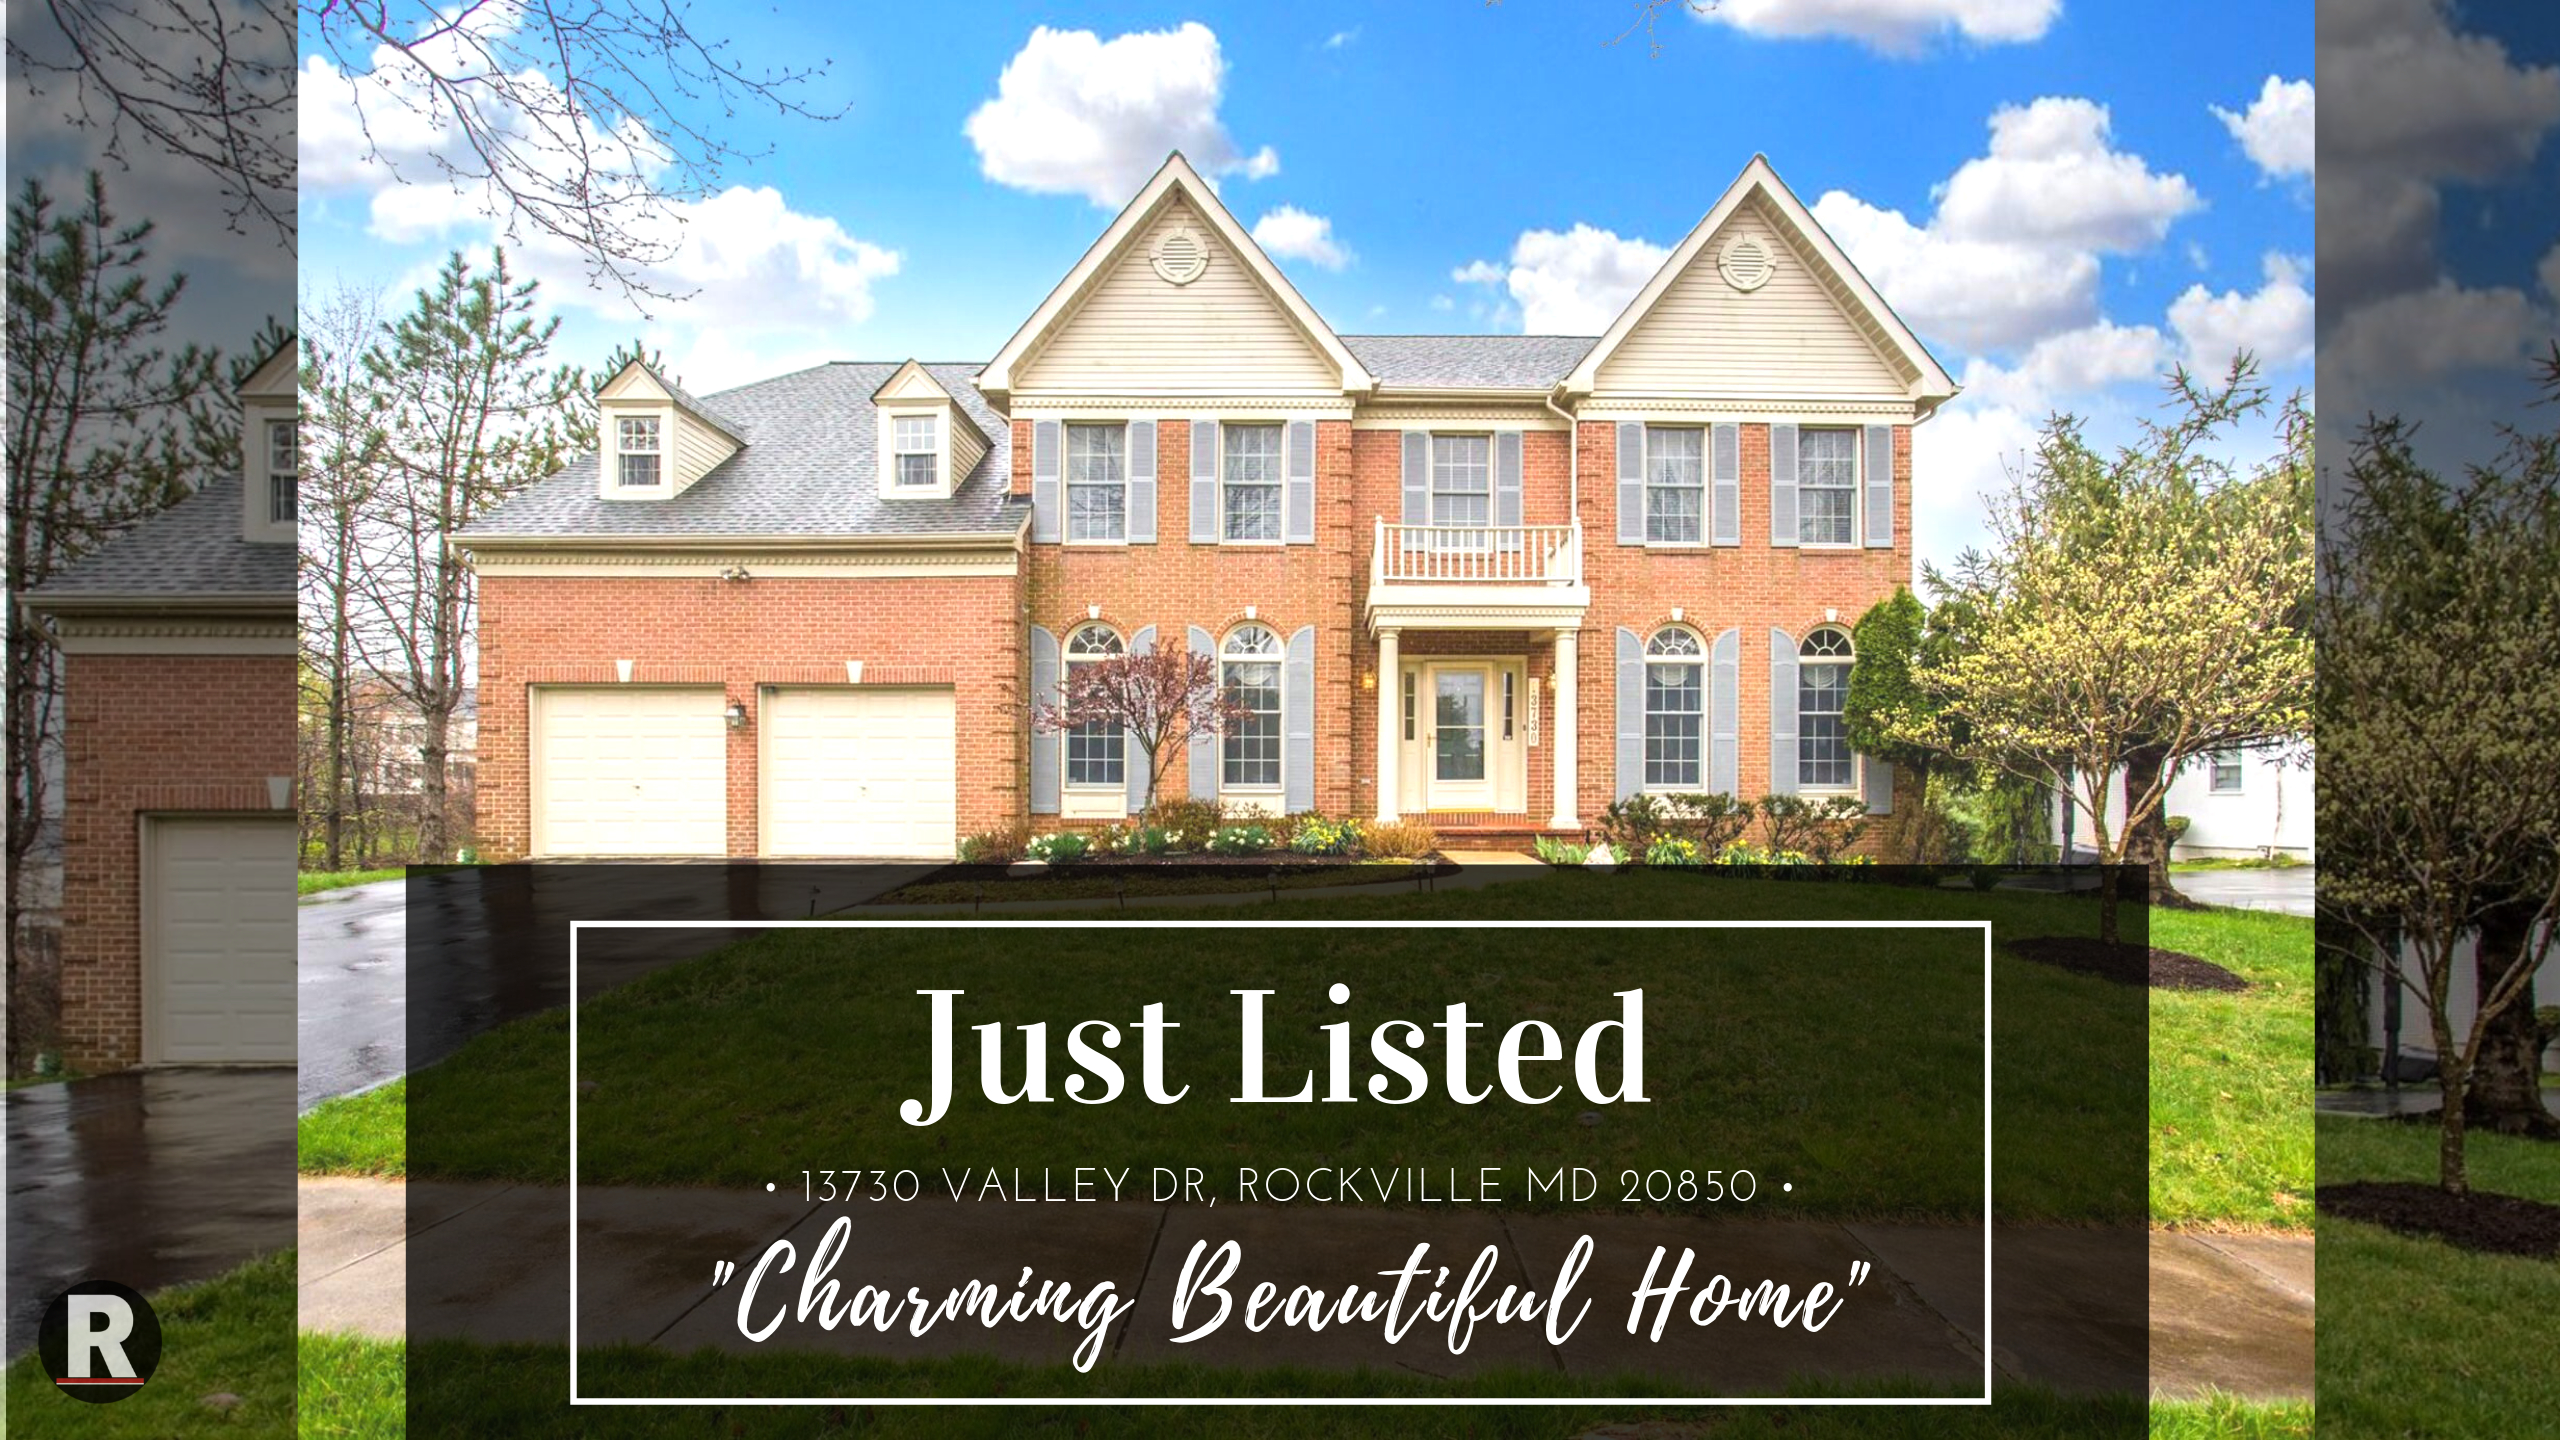 Just Listed! 13730 Valley Dr, Rockville MD 20850